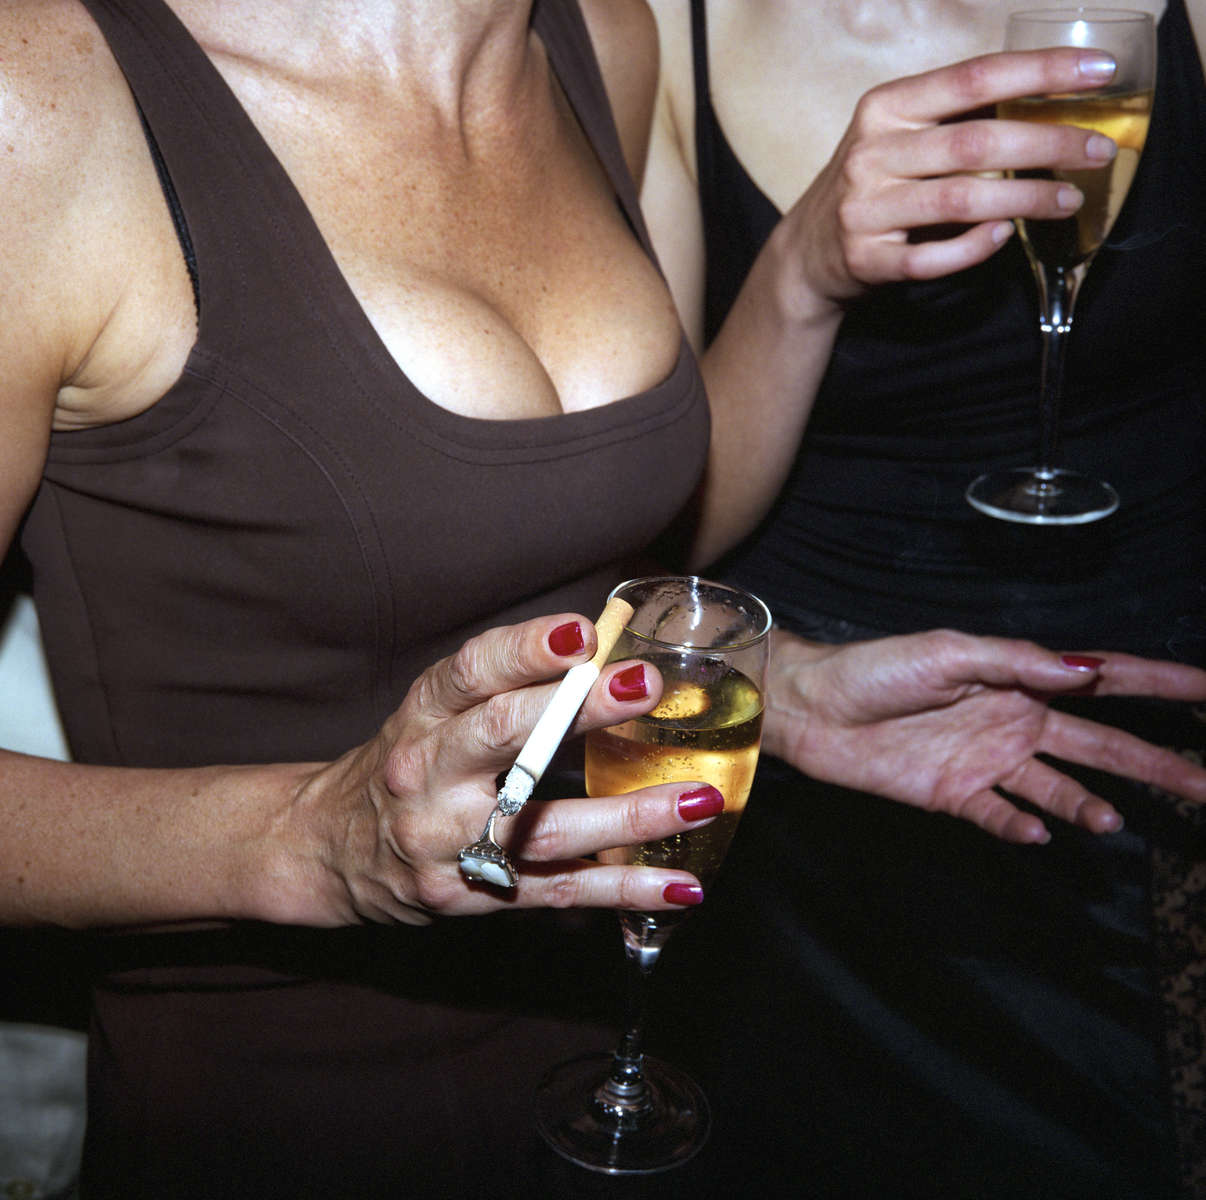 Two women drink champagne at a health resort launch party in central London. April 1998